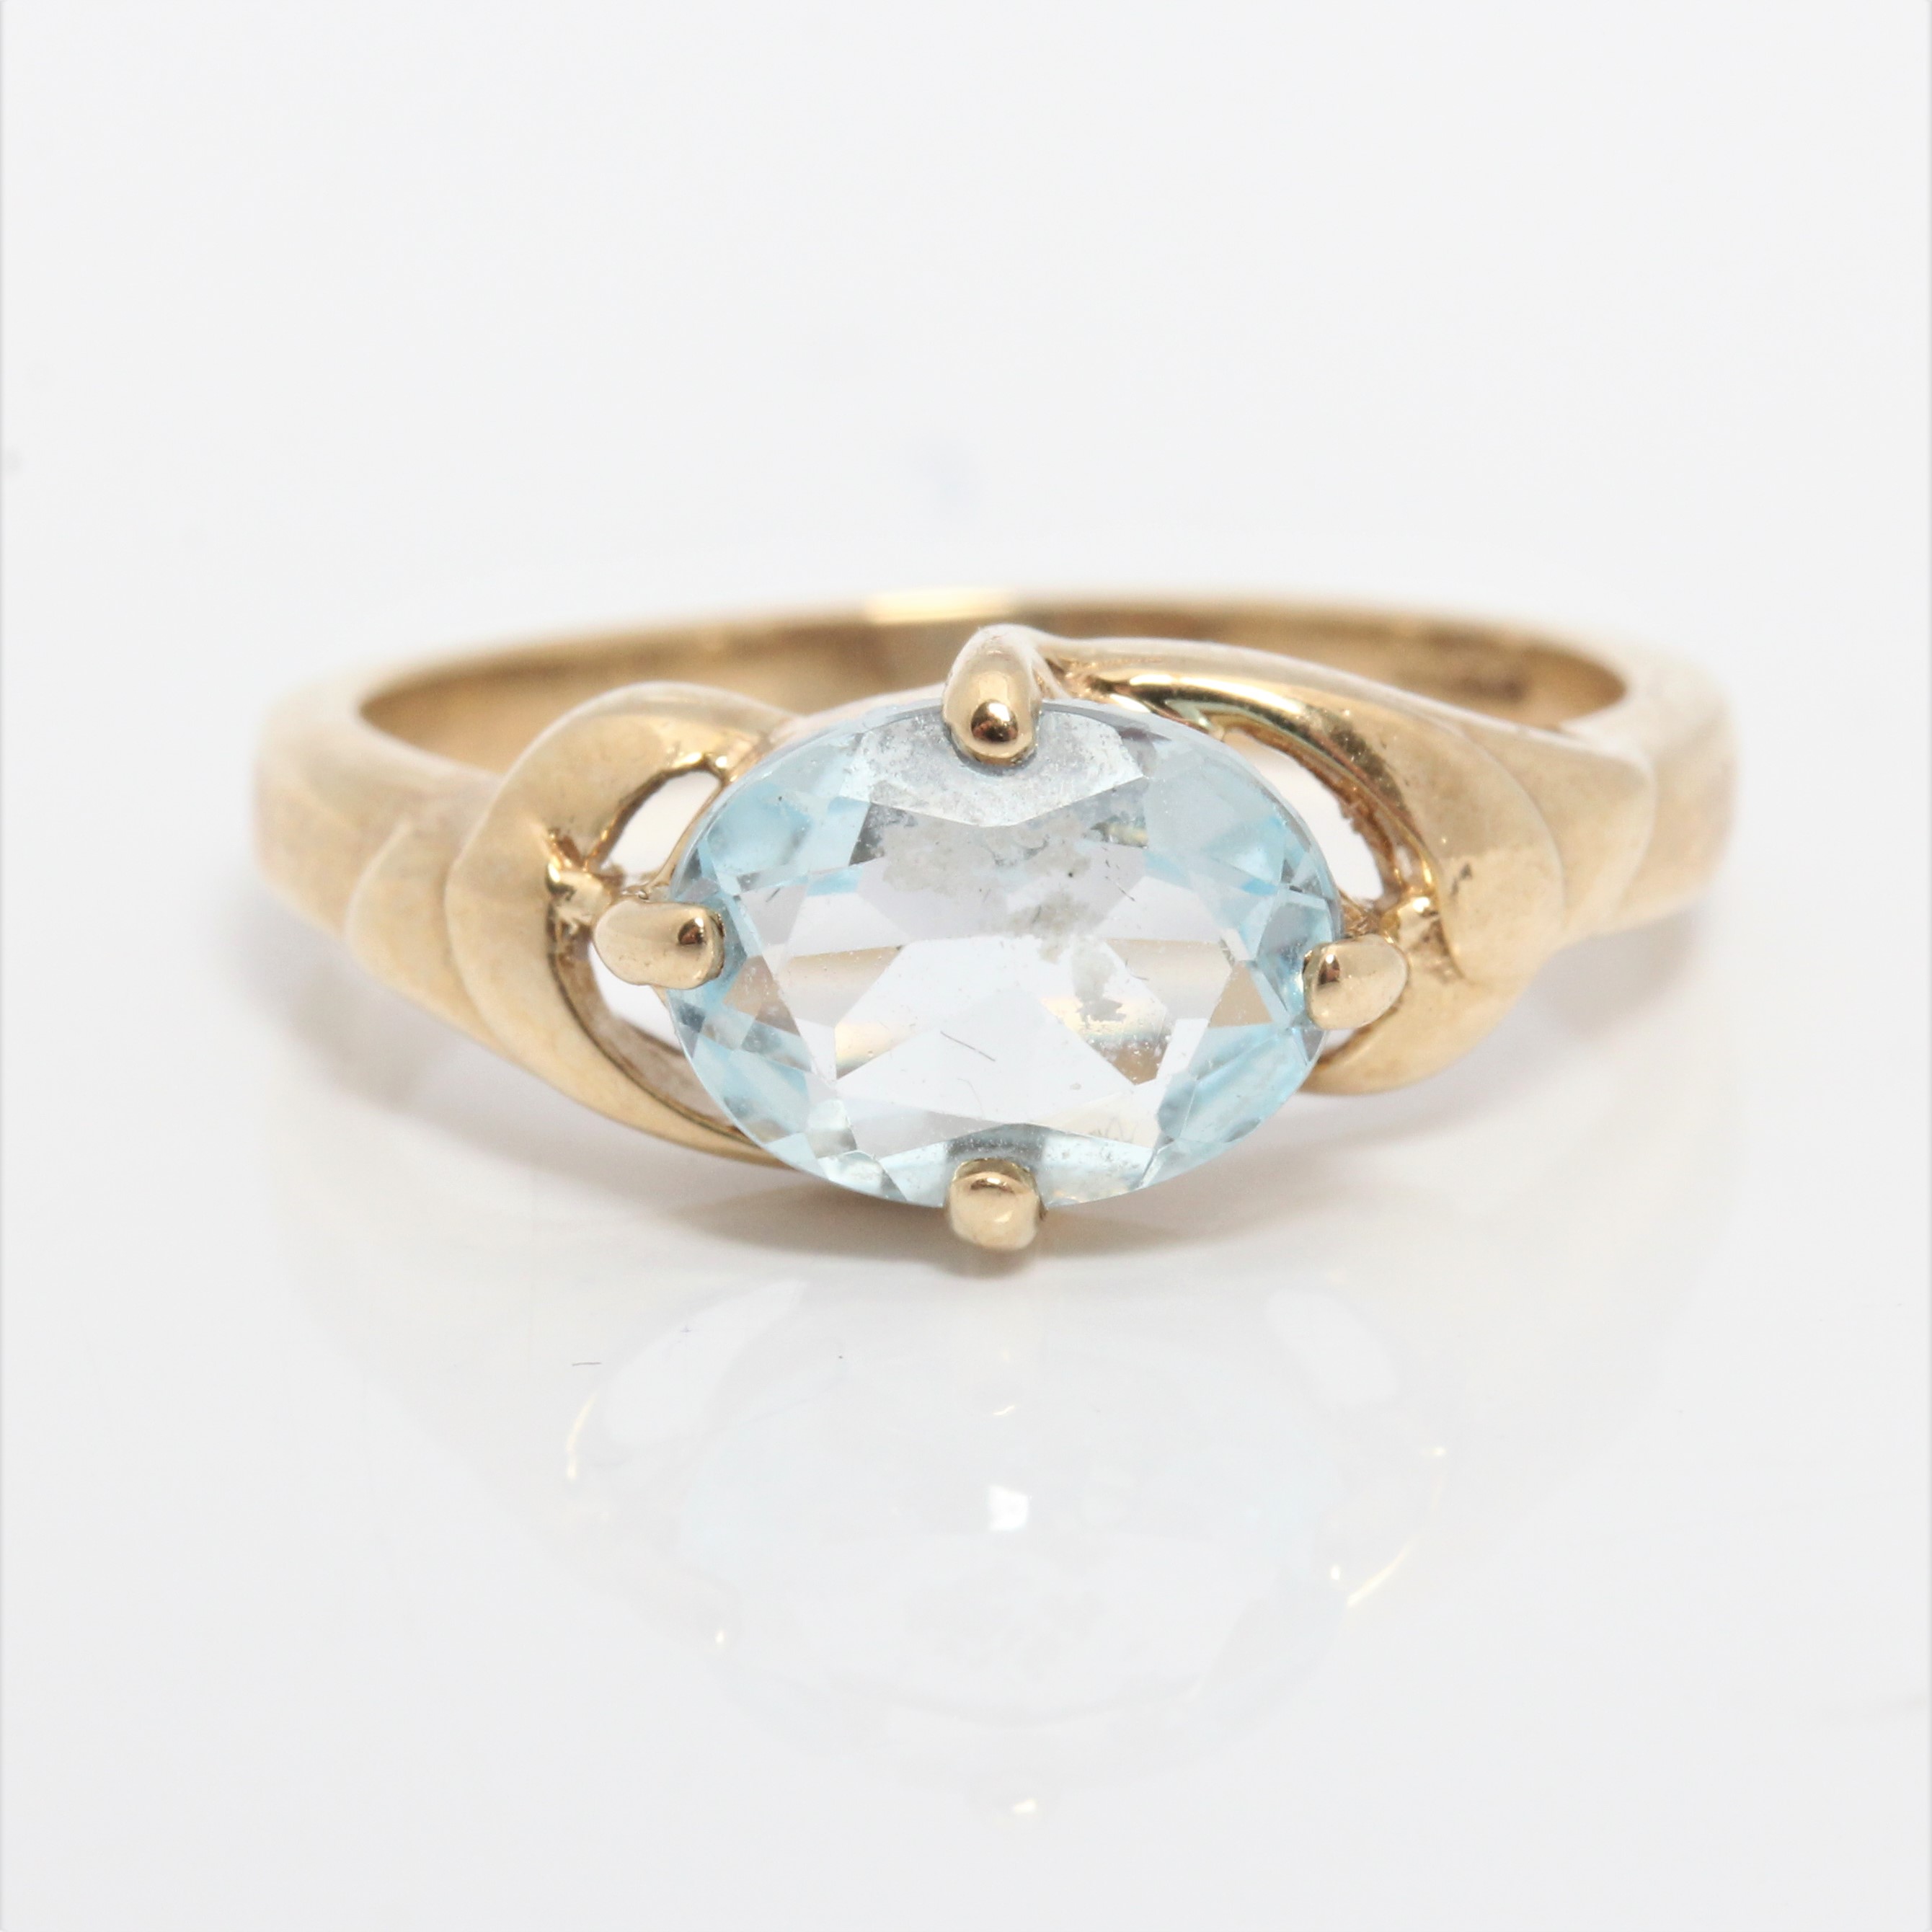 A hallmarked 9ct yellow gold blue topaz dress ring, ring size N 1/2